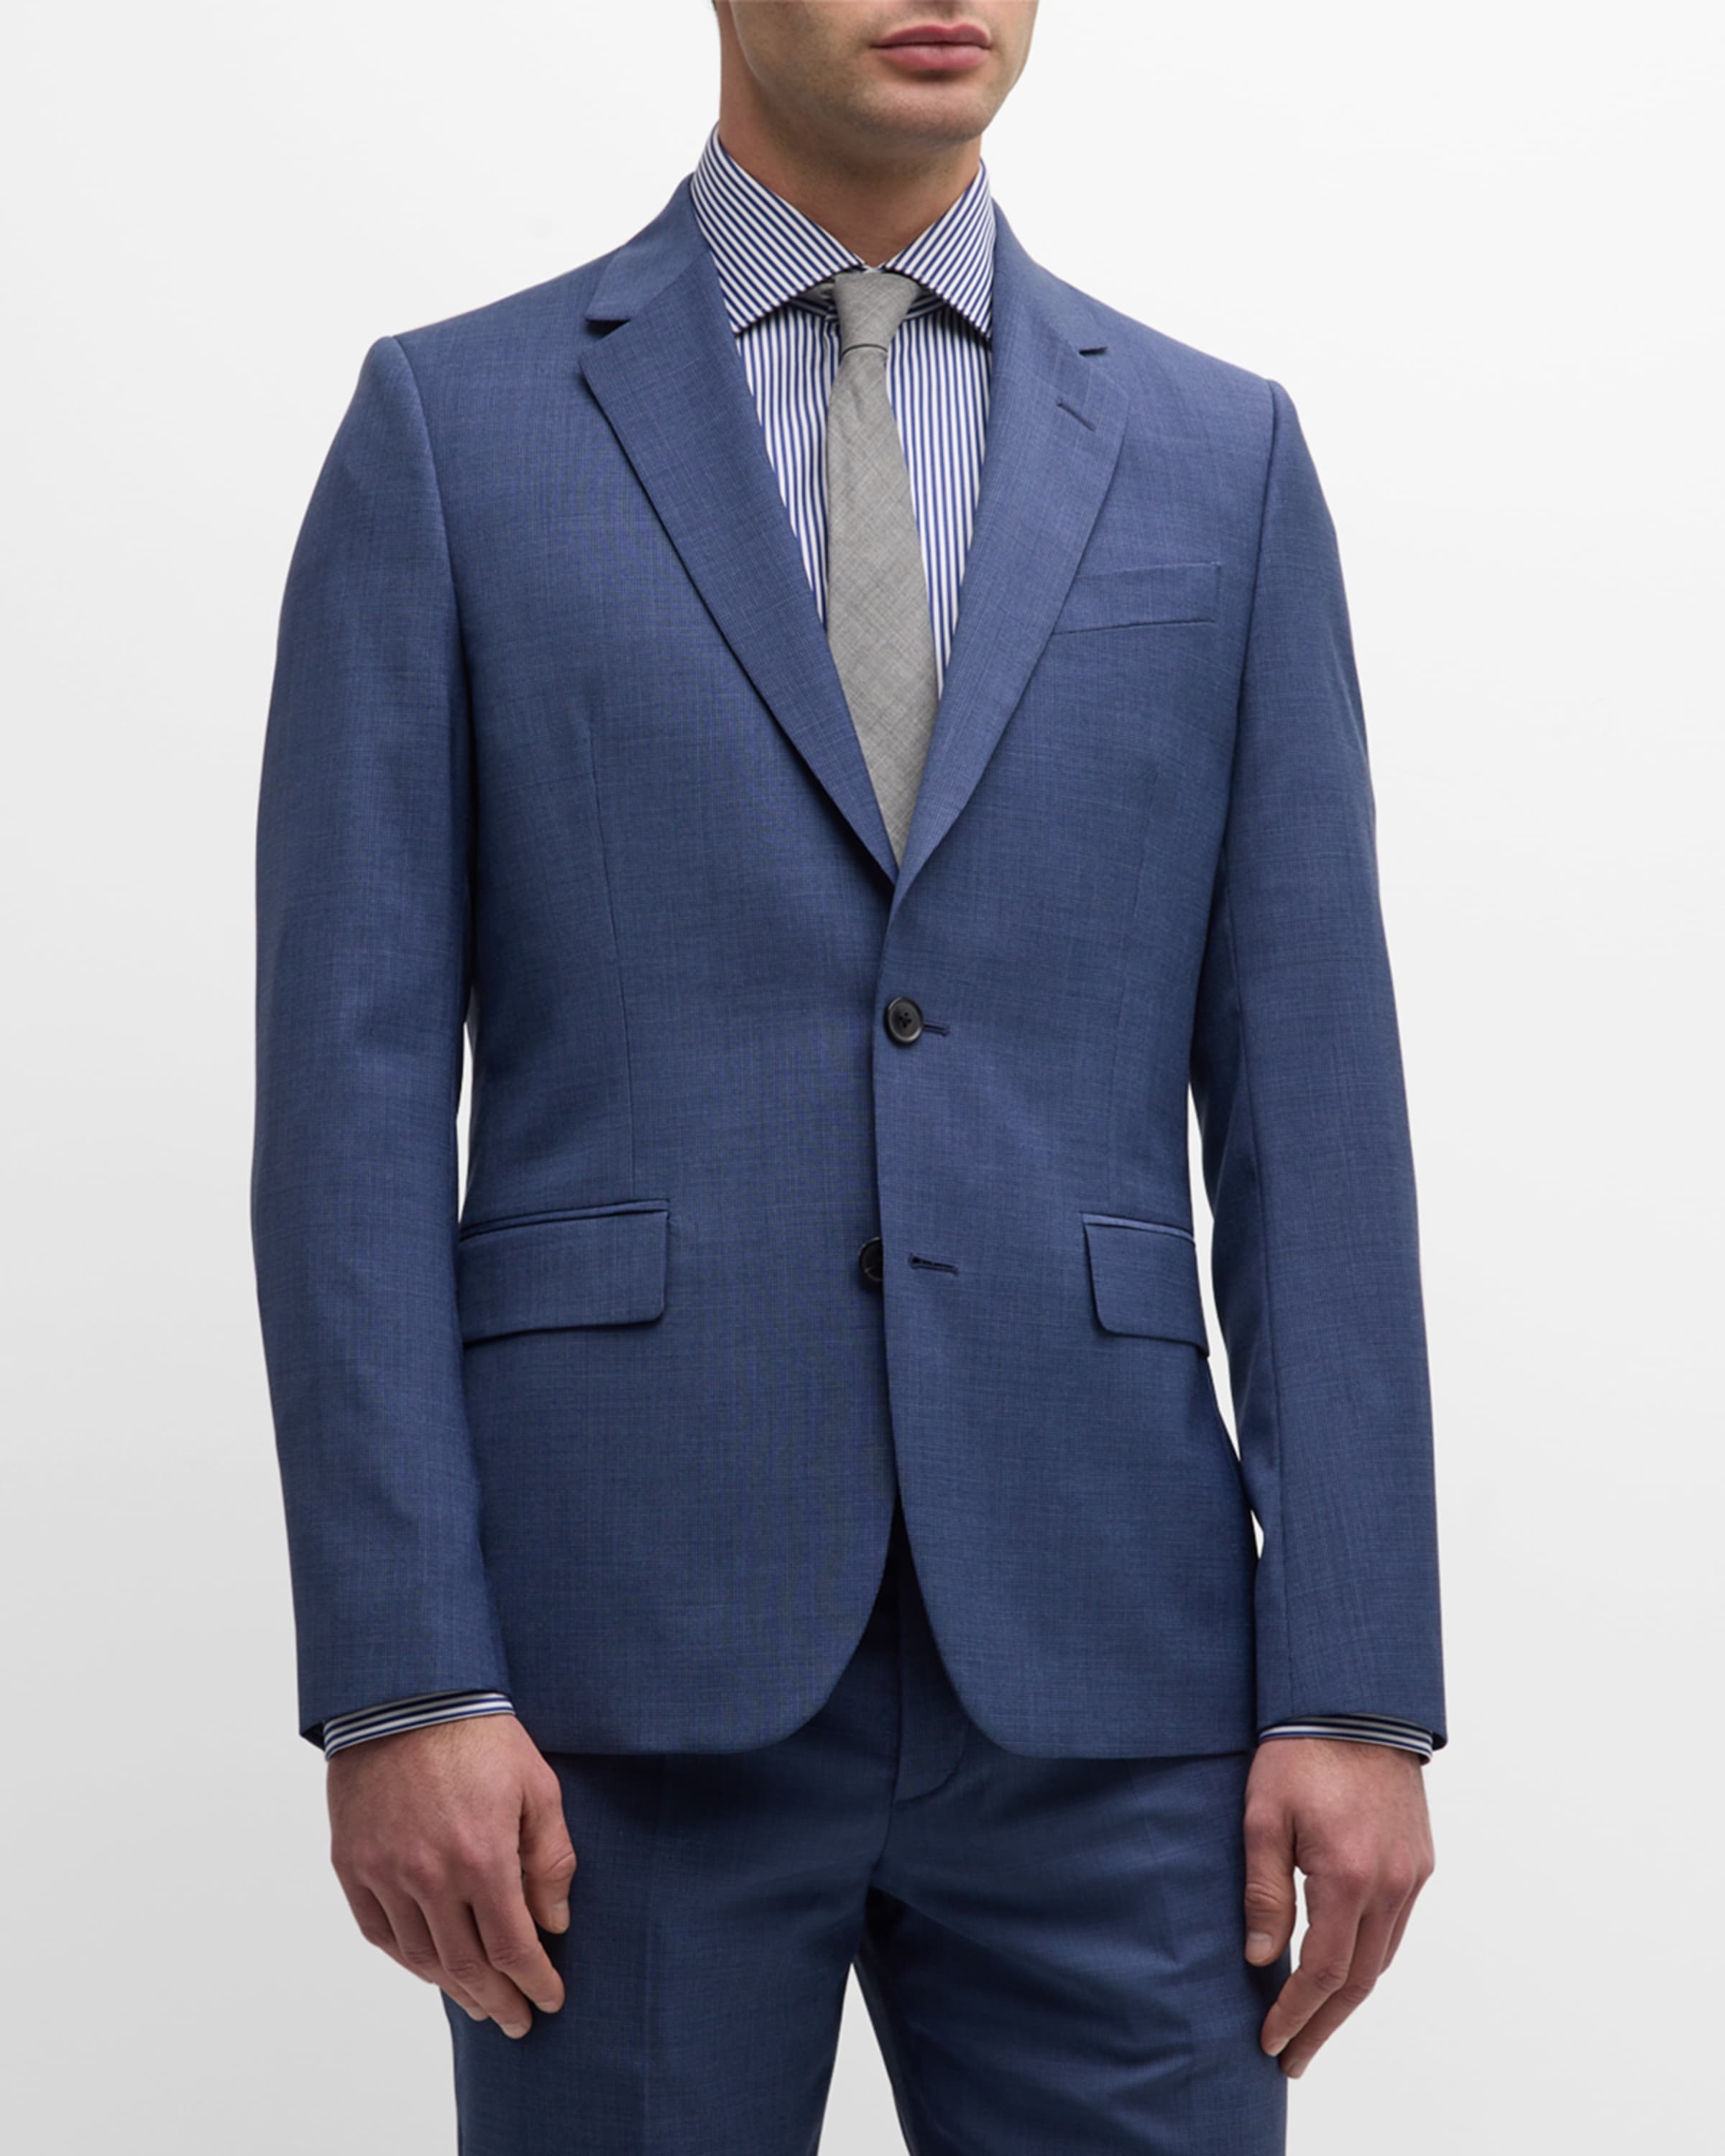 Men's Soho Fit Micro-Houndstooth Suit - 4